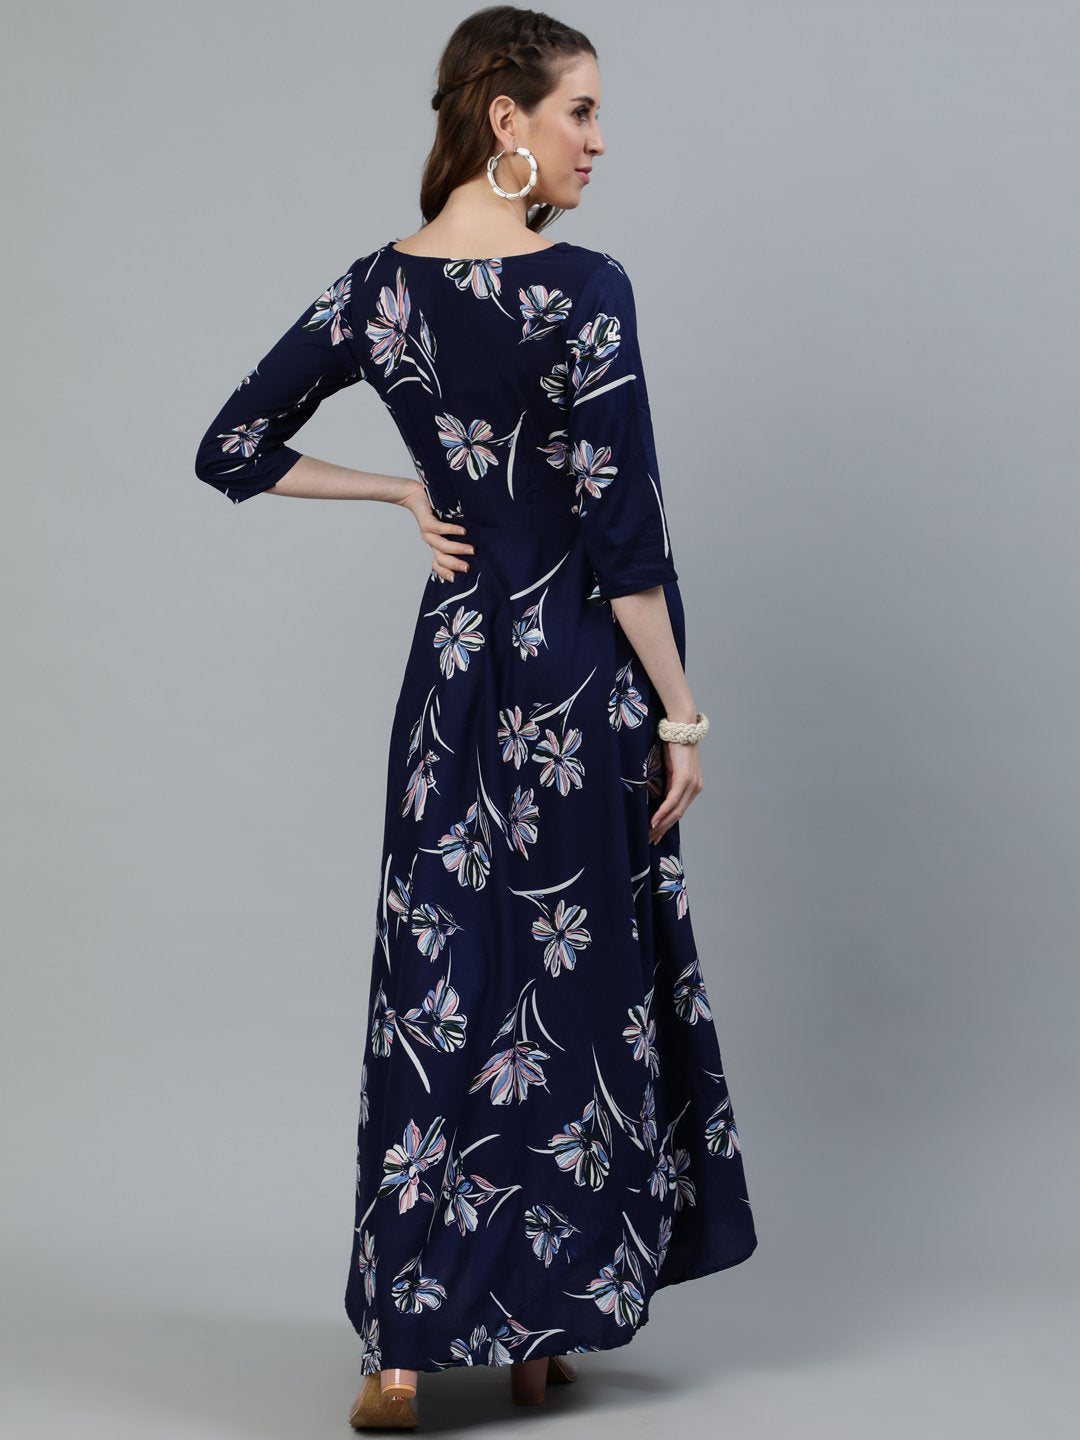 Women's Navy Blue Floral Printed Maxi Dress With Three Quarter Sleeves - Nayo Clothing